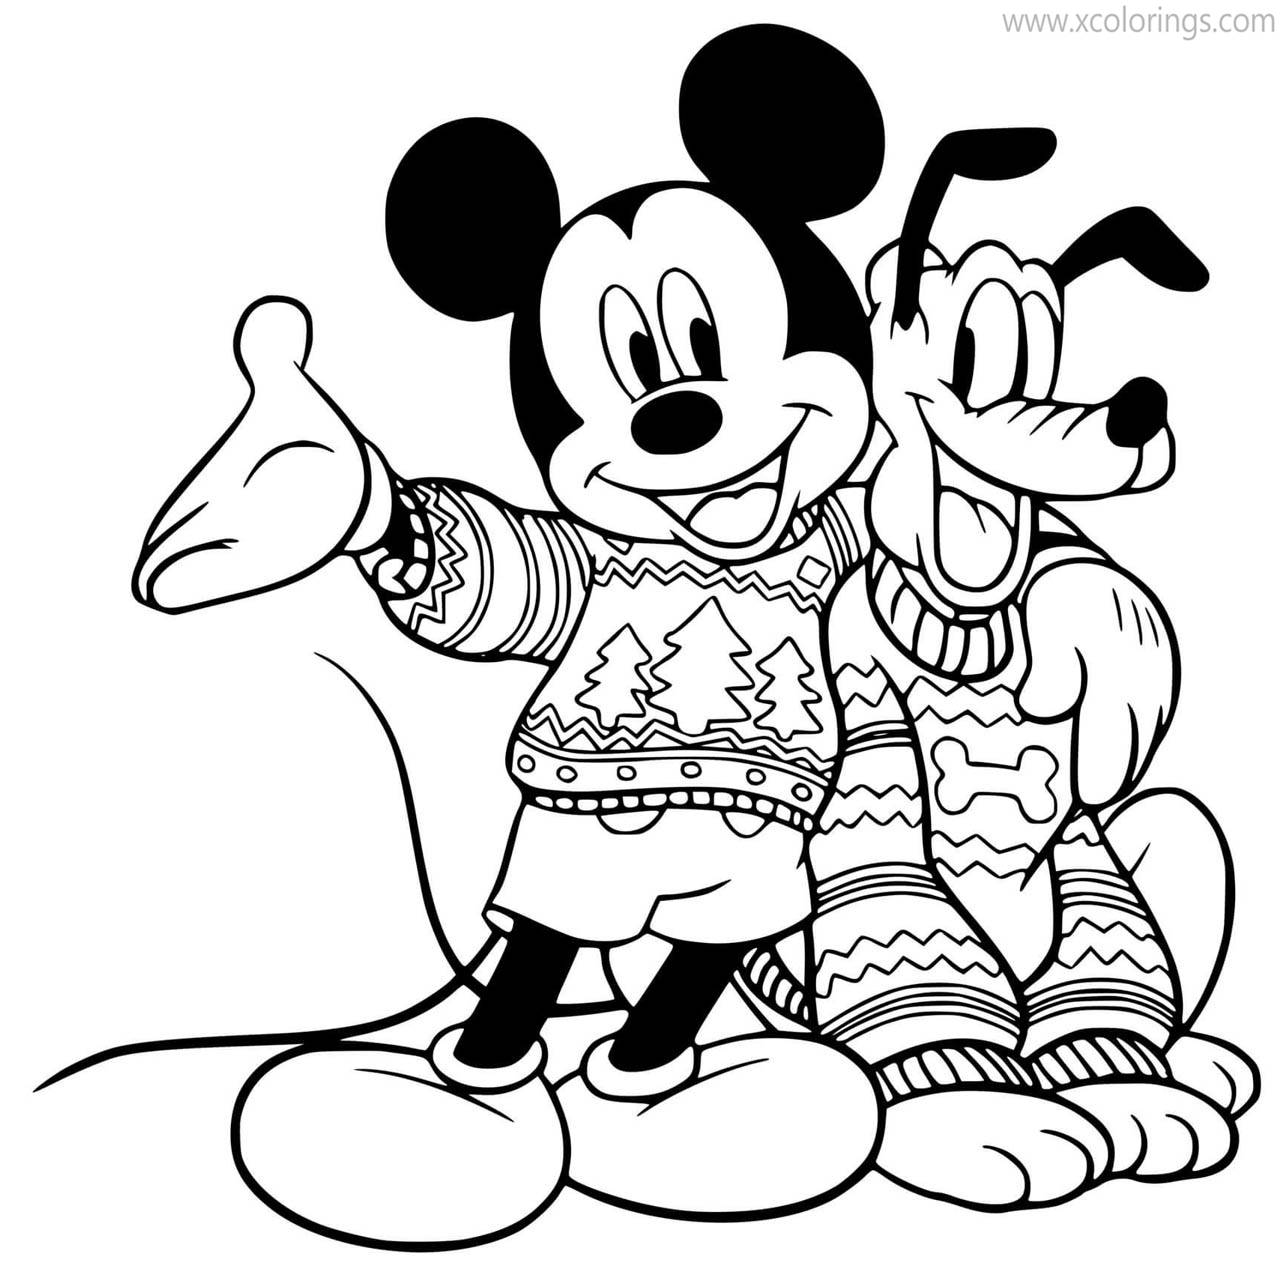 Free Mickey Mouse Christmas Sweater Coloring Pages printable